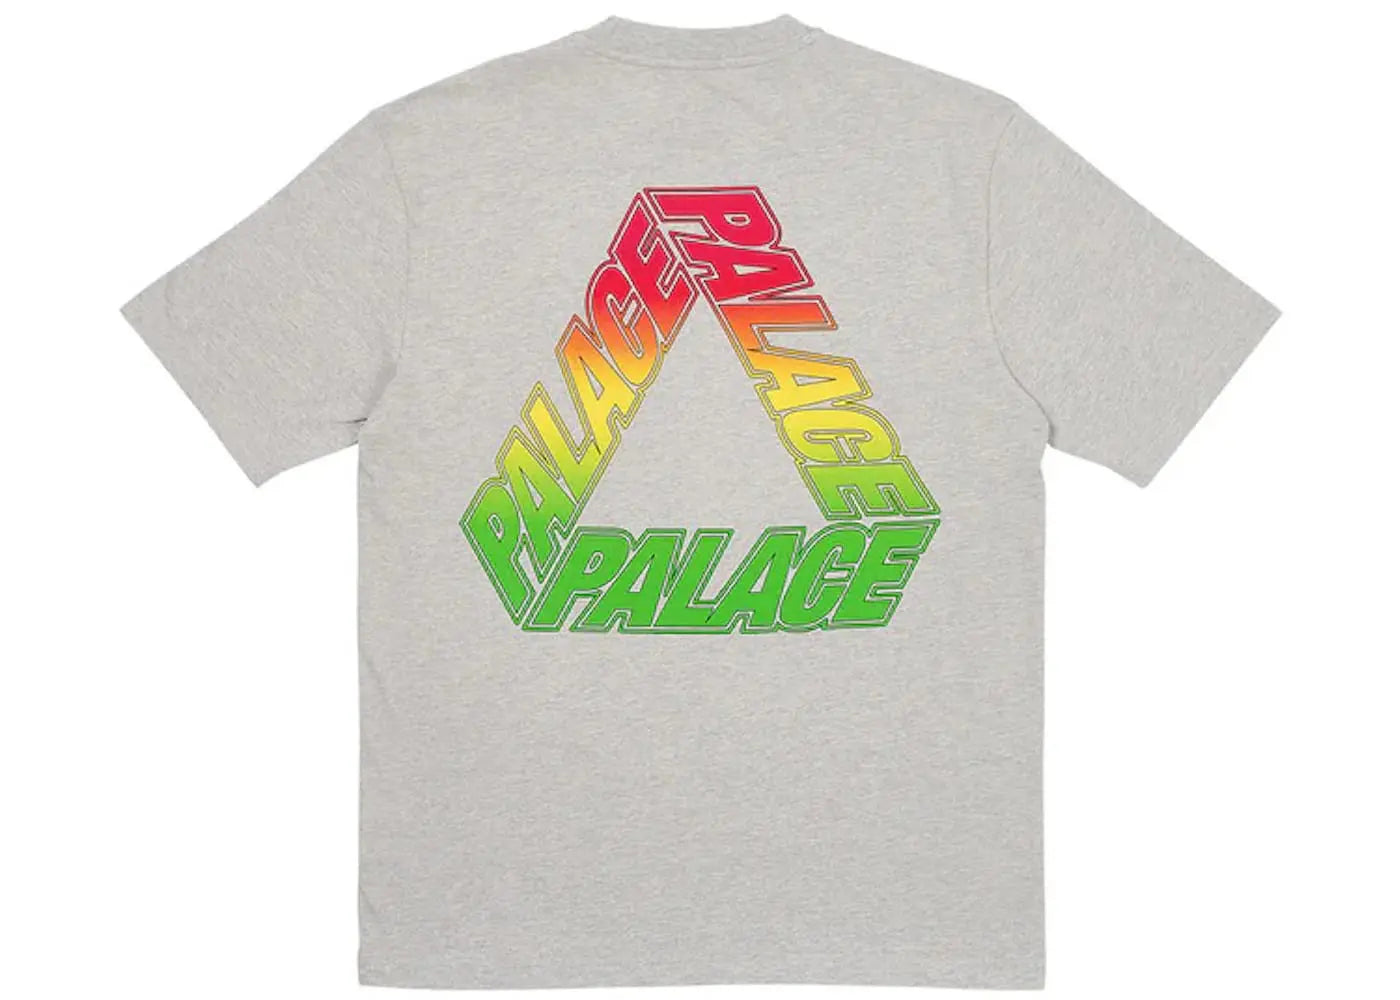 Palace Spectrum P3 T-Shirt Grey Marl in Auckland, New Zealand - Shop name